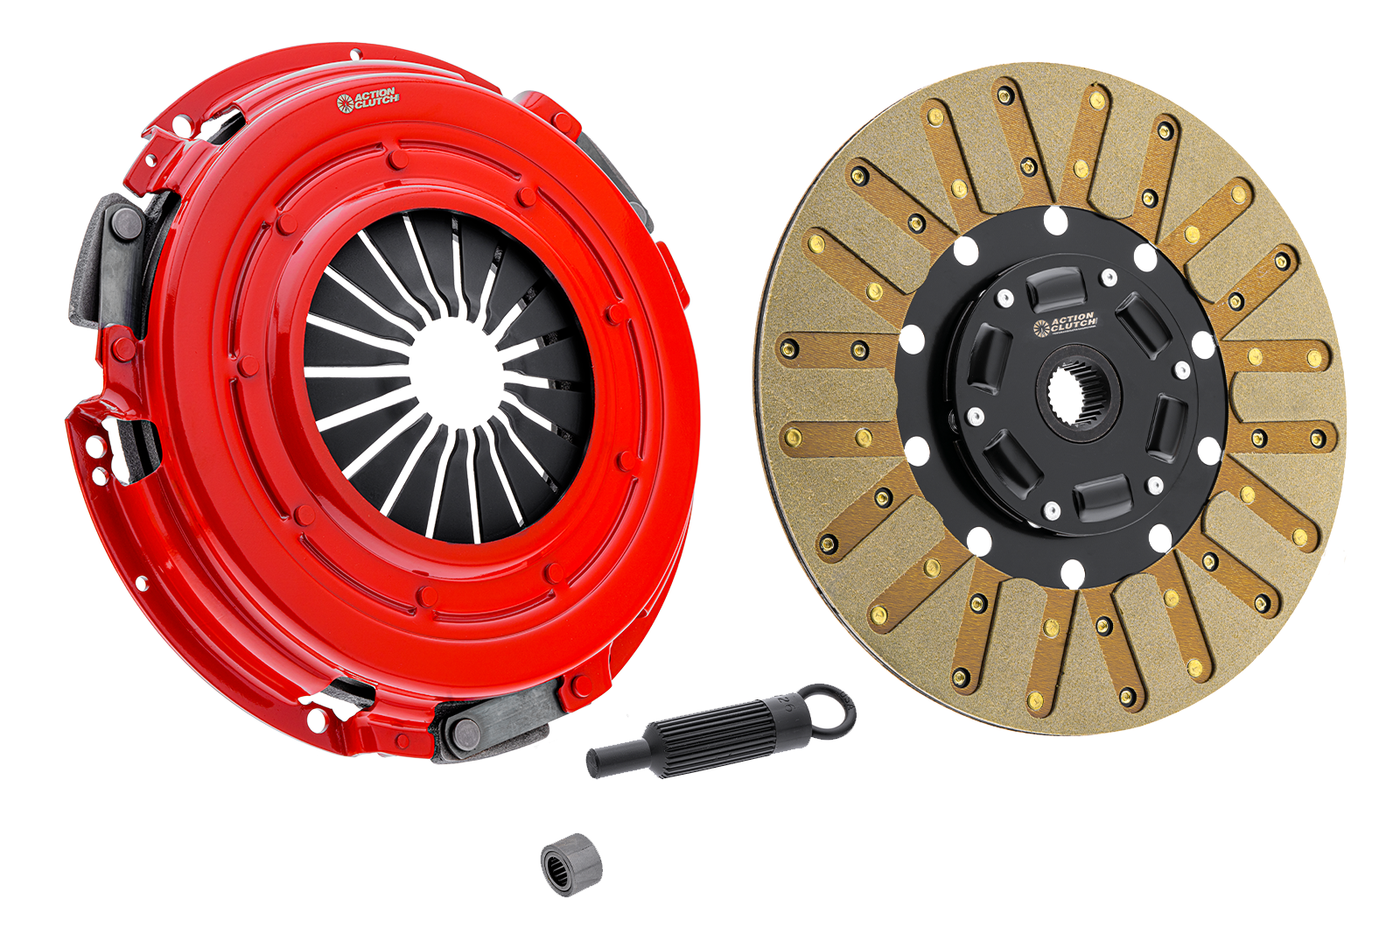 Stage 2 Clutch Kit (1KS) for Pontiac Firebird Firehawk 1998-2002 5.7L (LS1) Without Slave and Release Bearing